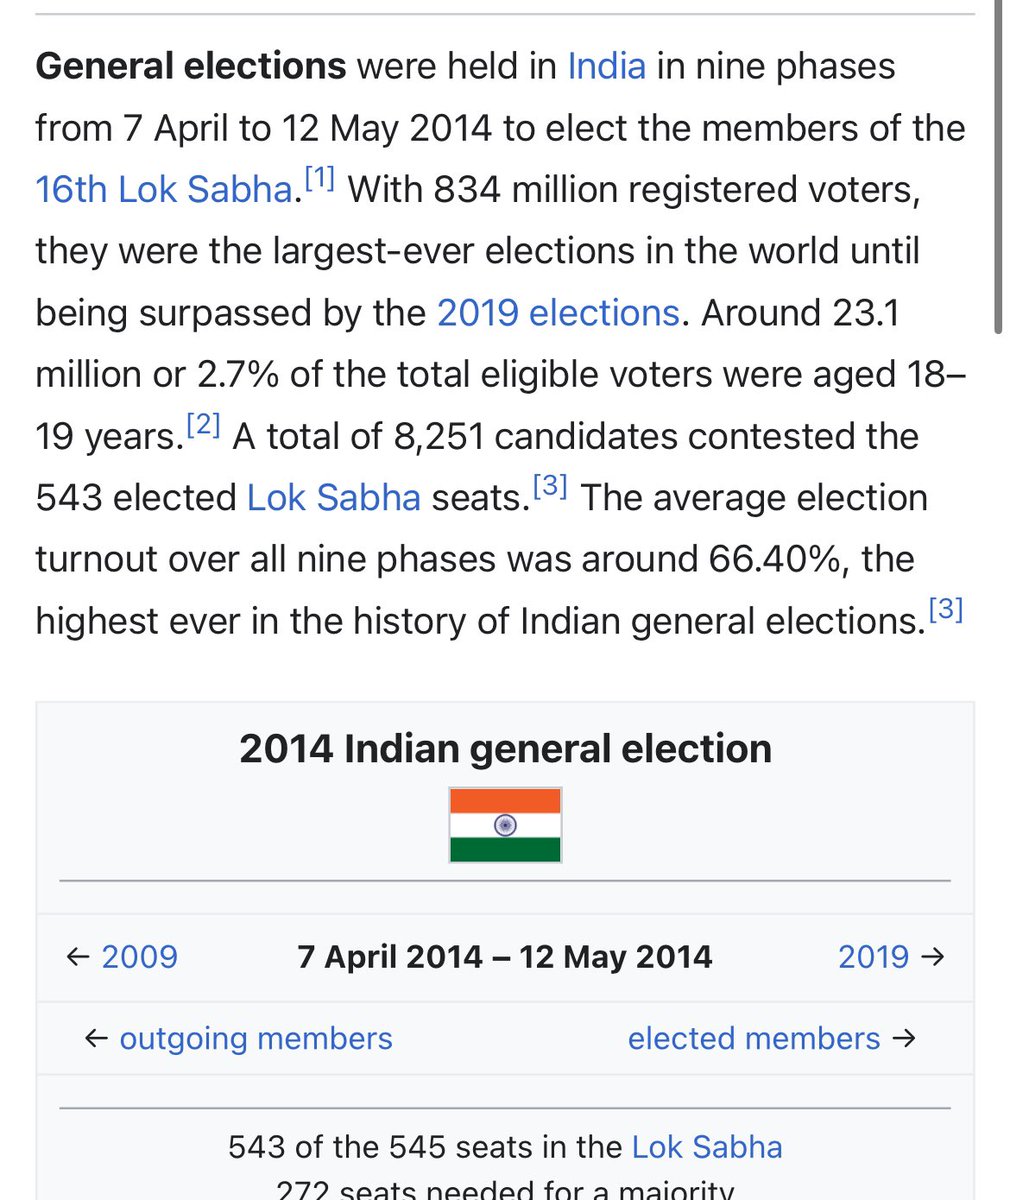 @nramind So what happened in 2014?
2014 election schedule was 
7 April to 12 May.
Why did Congress kill #Democracy in 2014???????????????????????